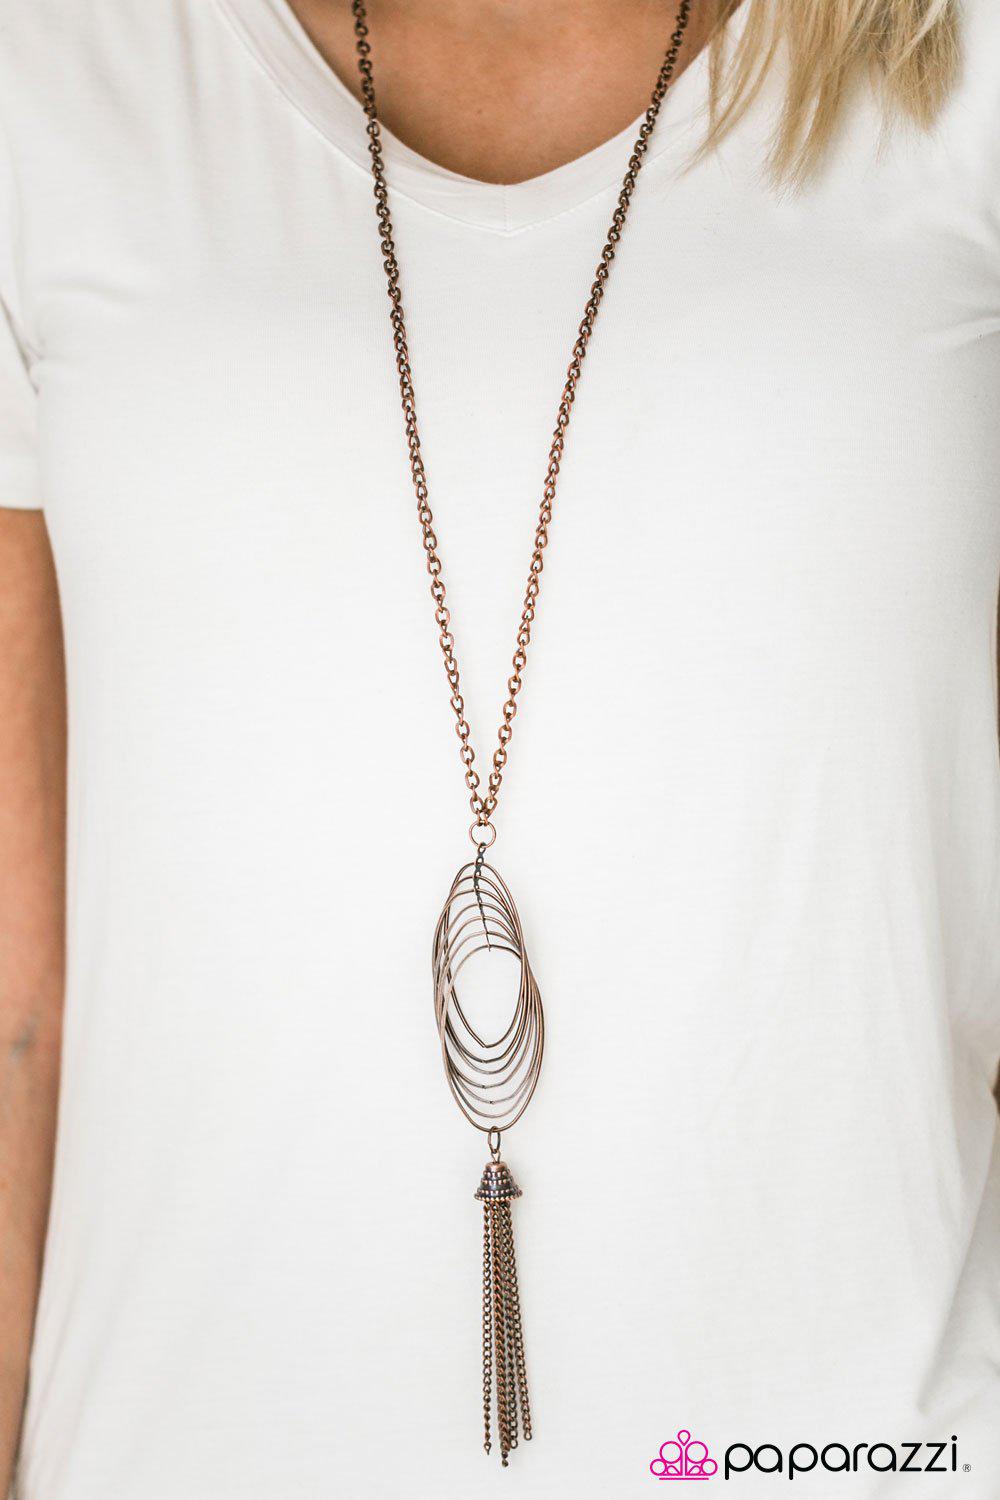 Twirl and Tassel Copper Necklace - Paparazzi Accessories-CarasShop.com - $5 Jewelry by Cara Jewels